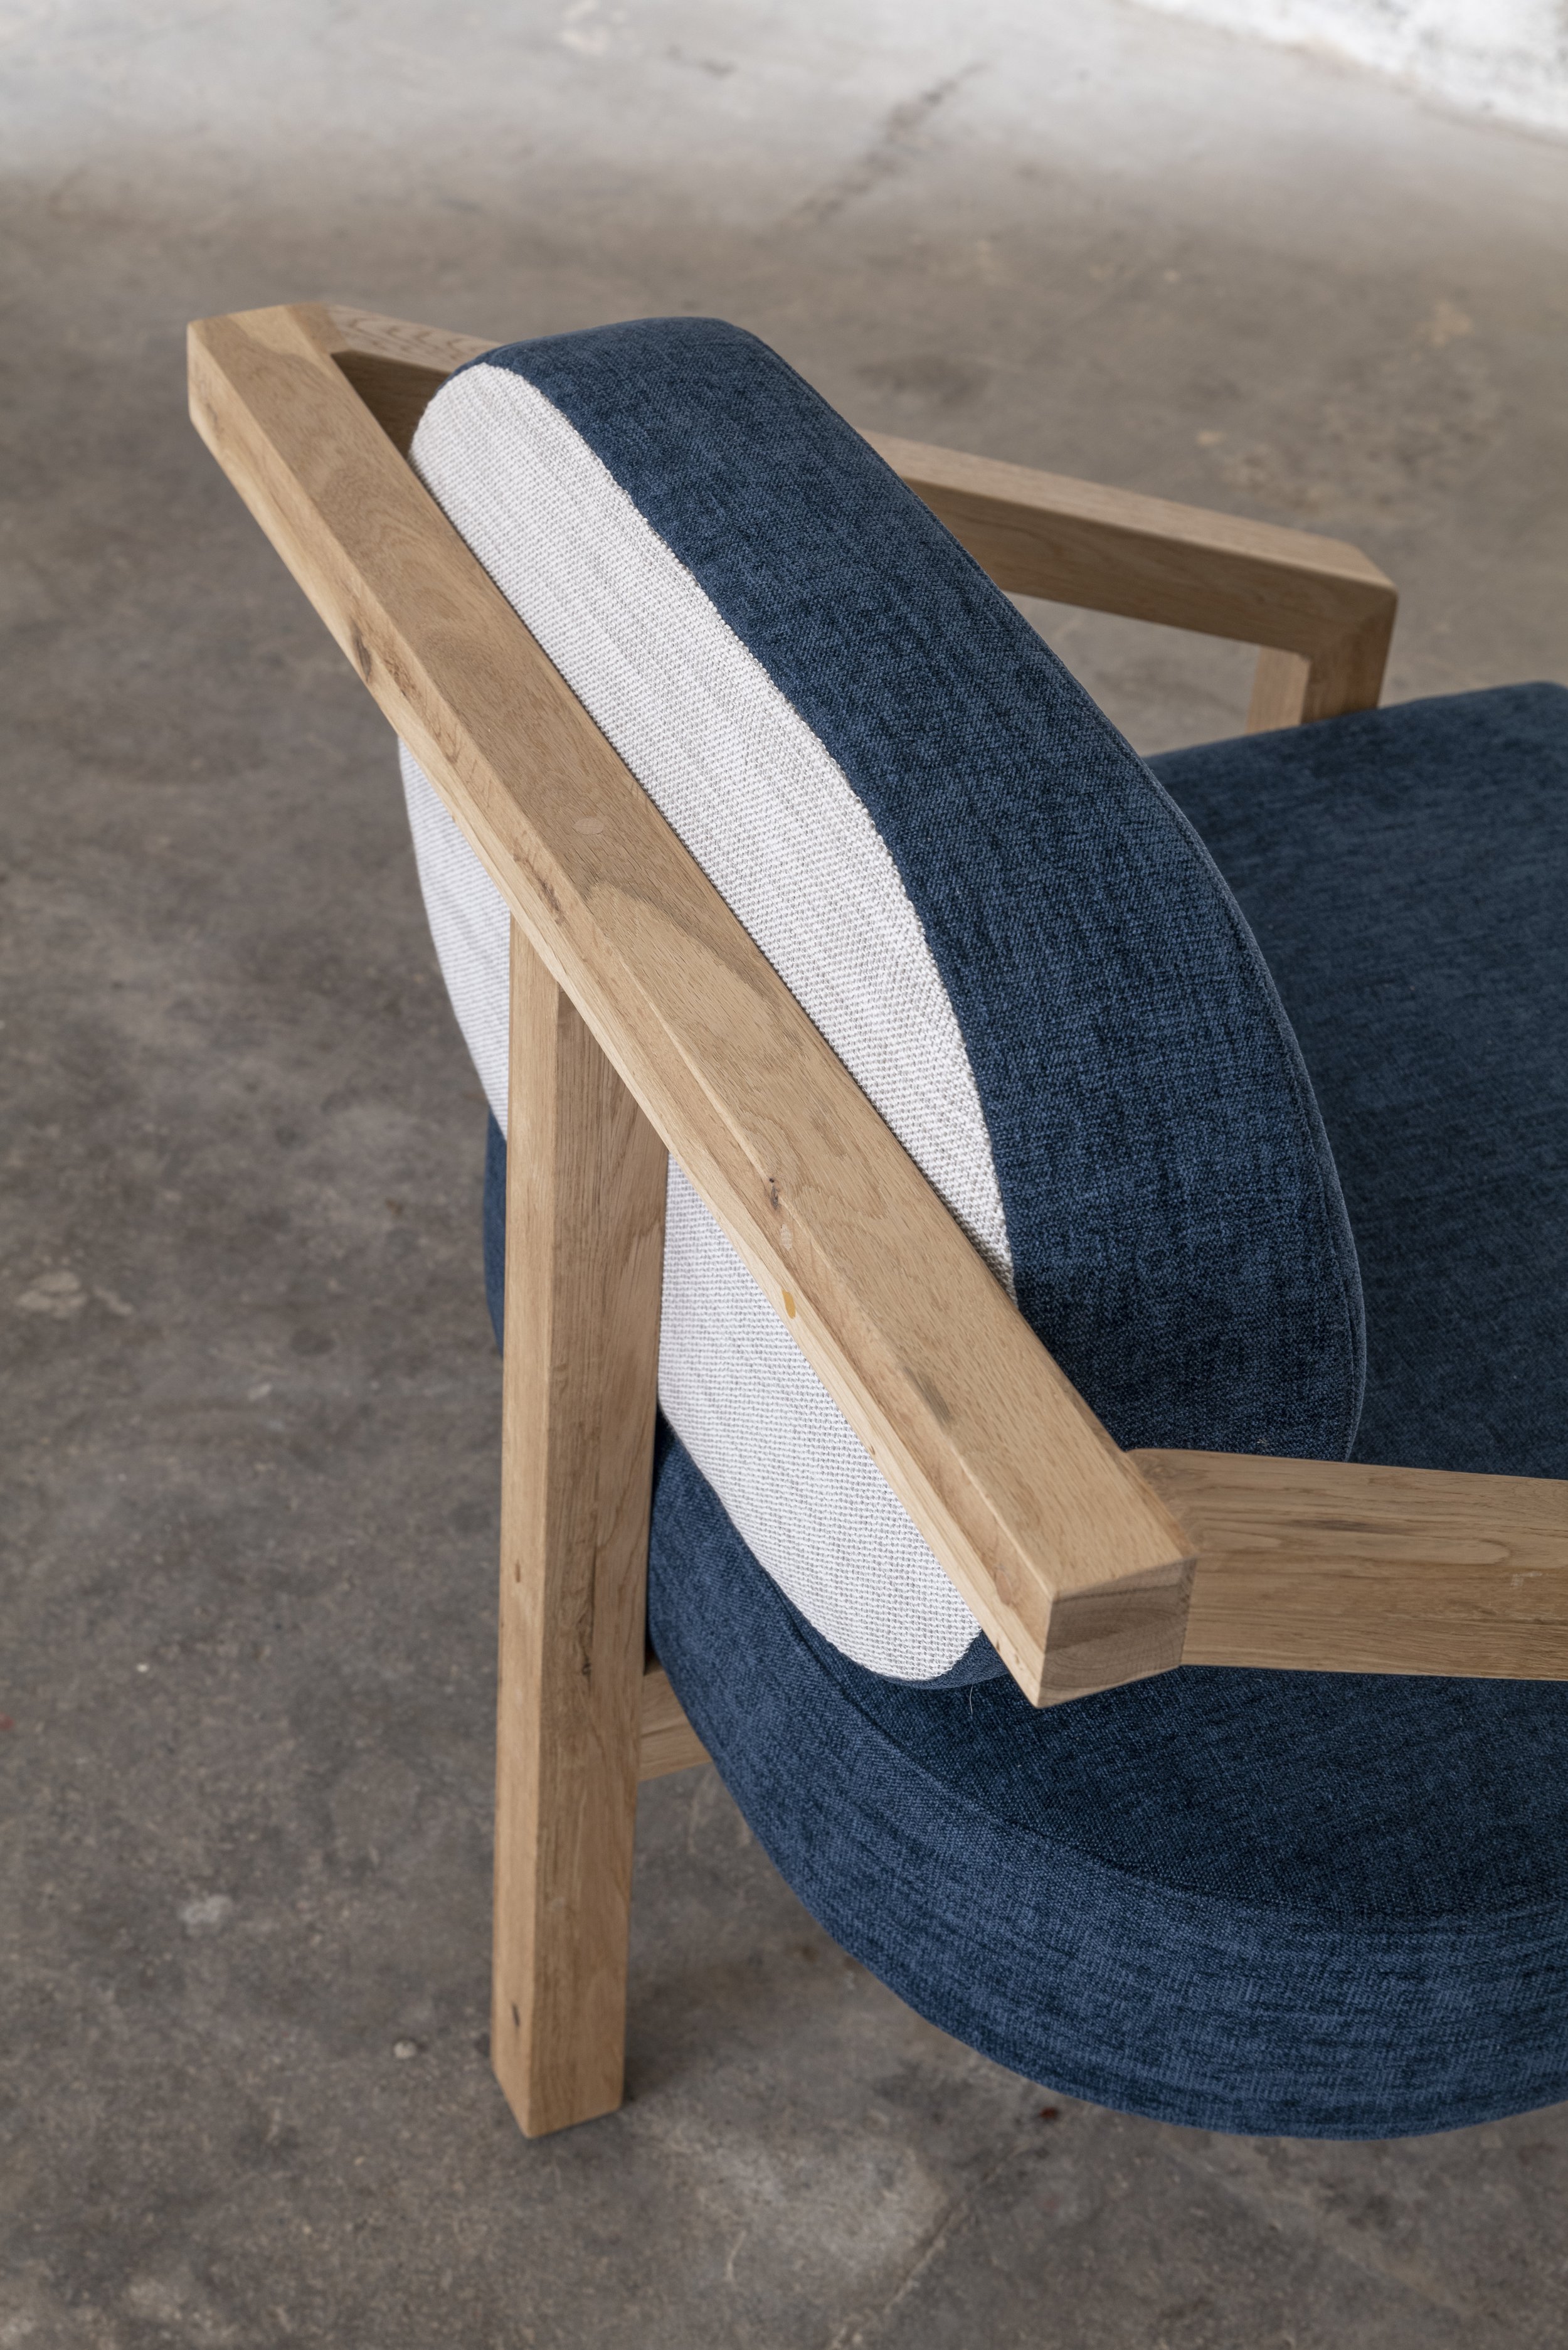 Fauteuil en upcycling Mudmobilier